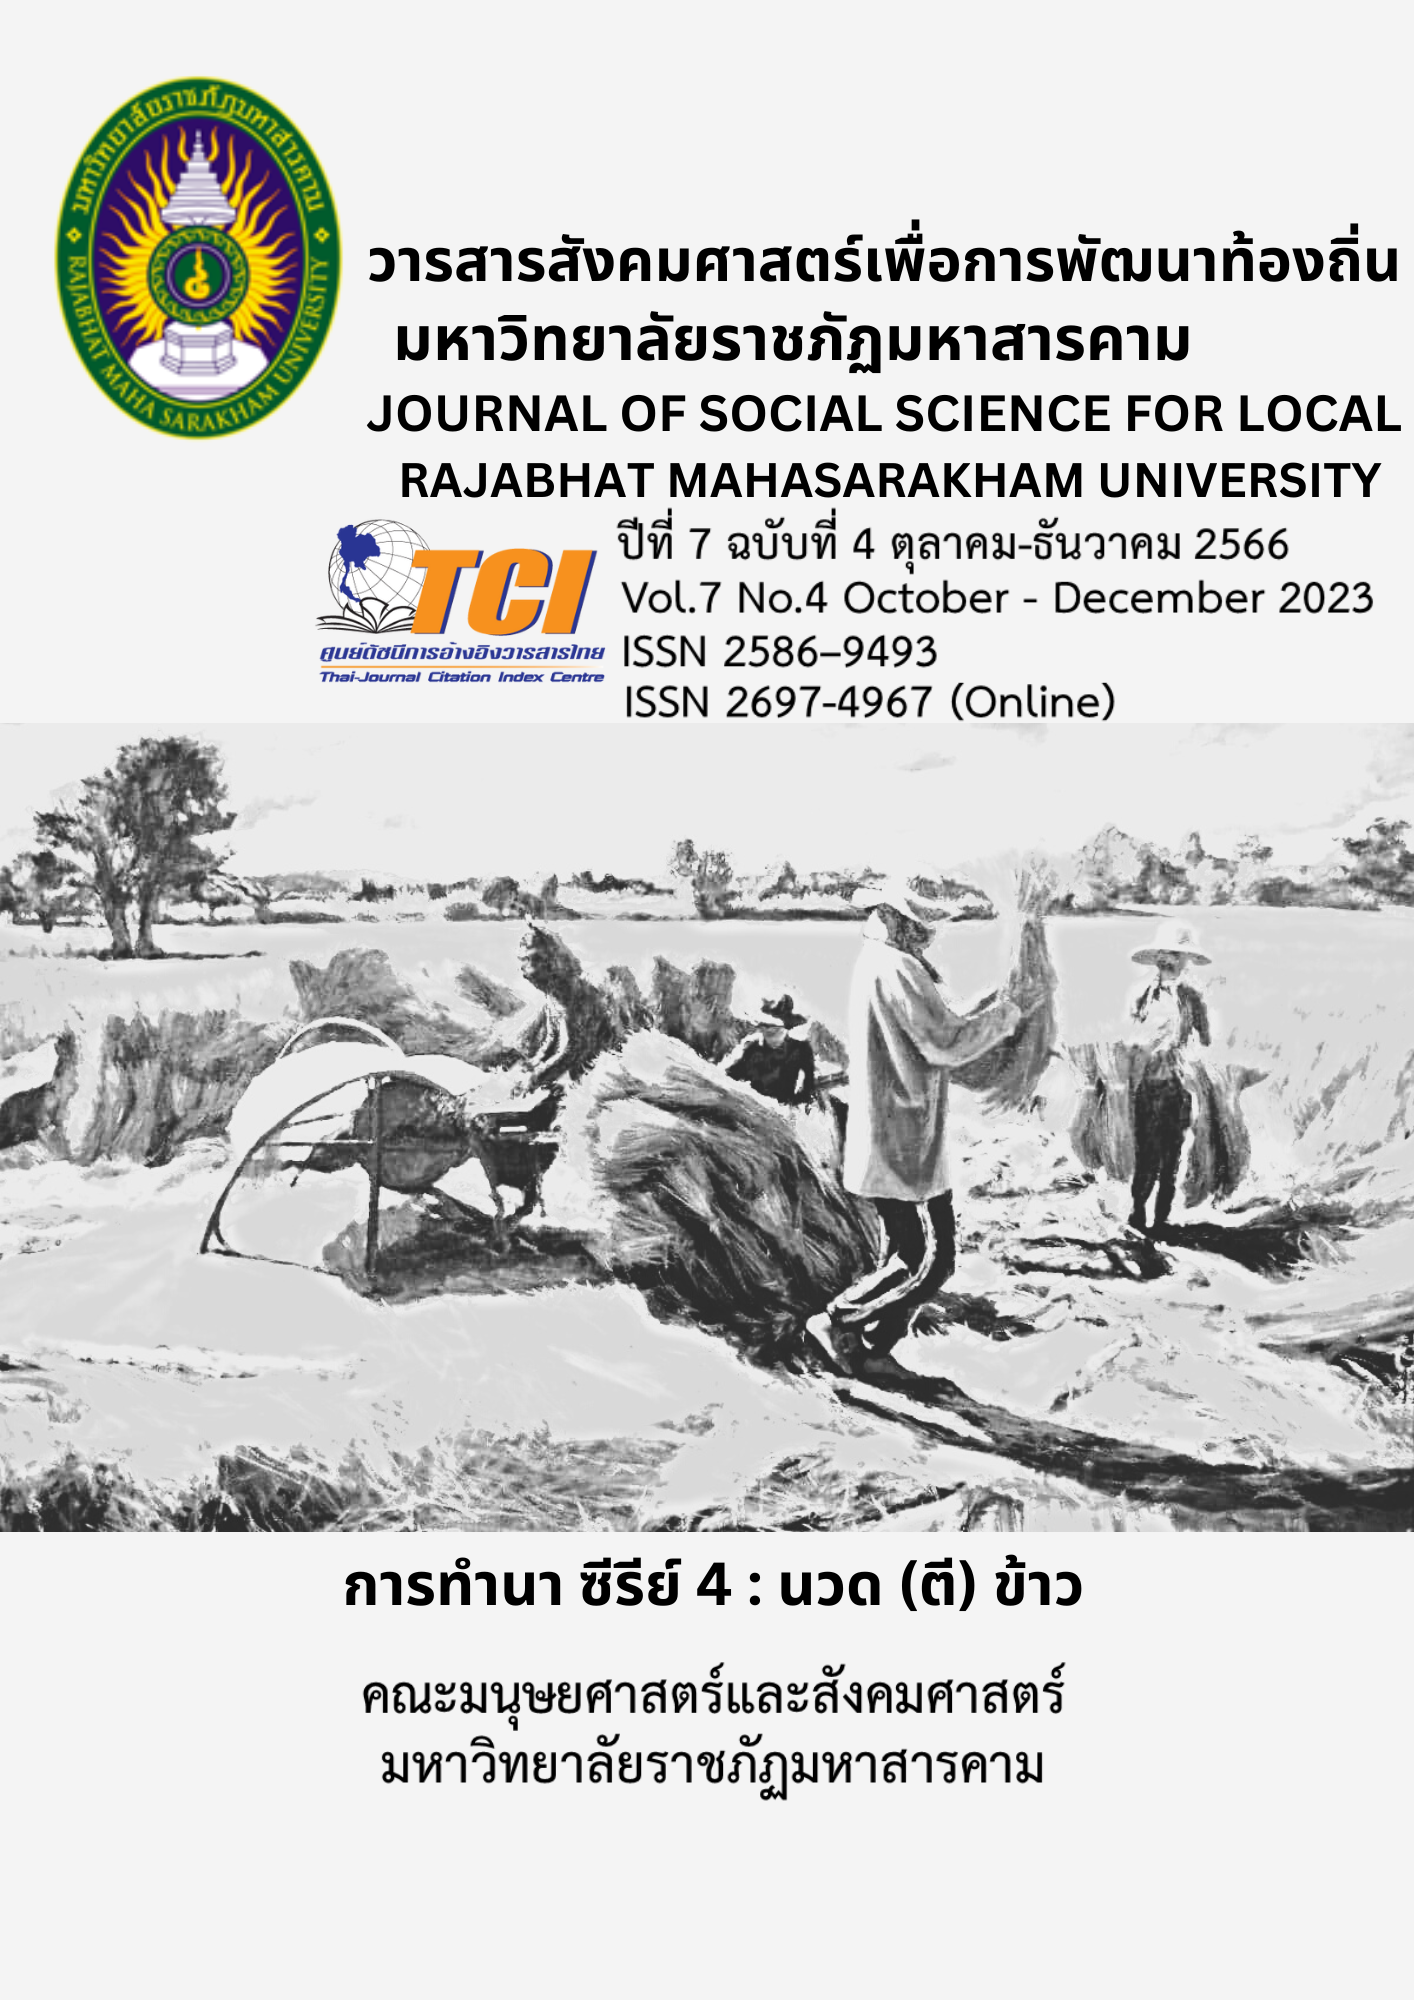 					View Vol. 7 No. 3 (2023): JOURNAL OF SOCIAL SCIENCE FOR LOCAL RAJABHAT MAHASARAKHAM UNIVERSITY
				